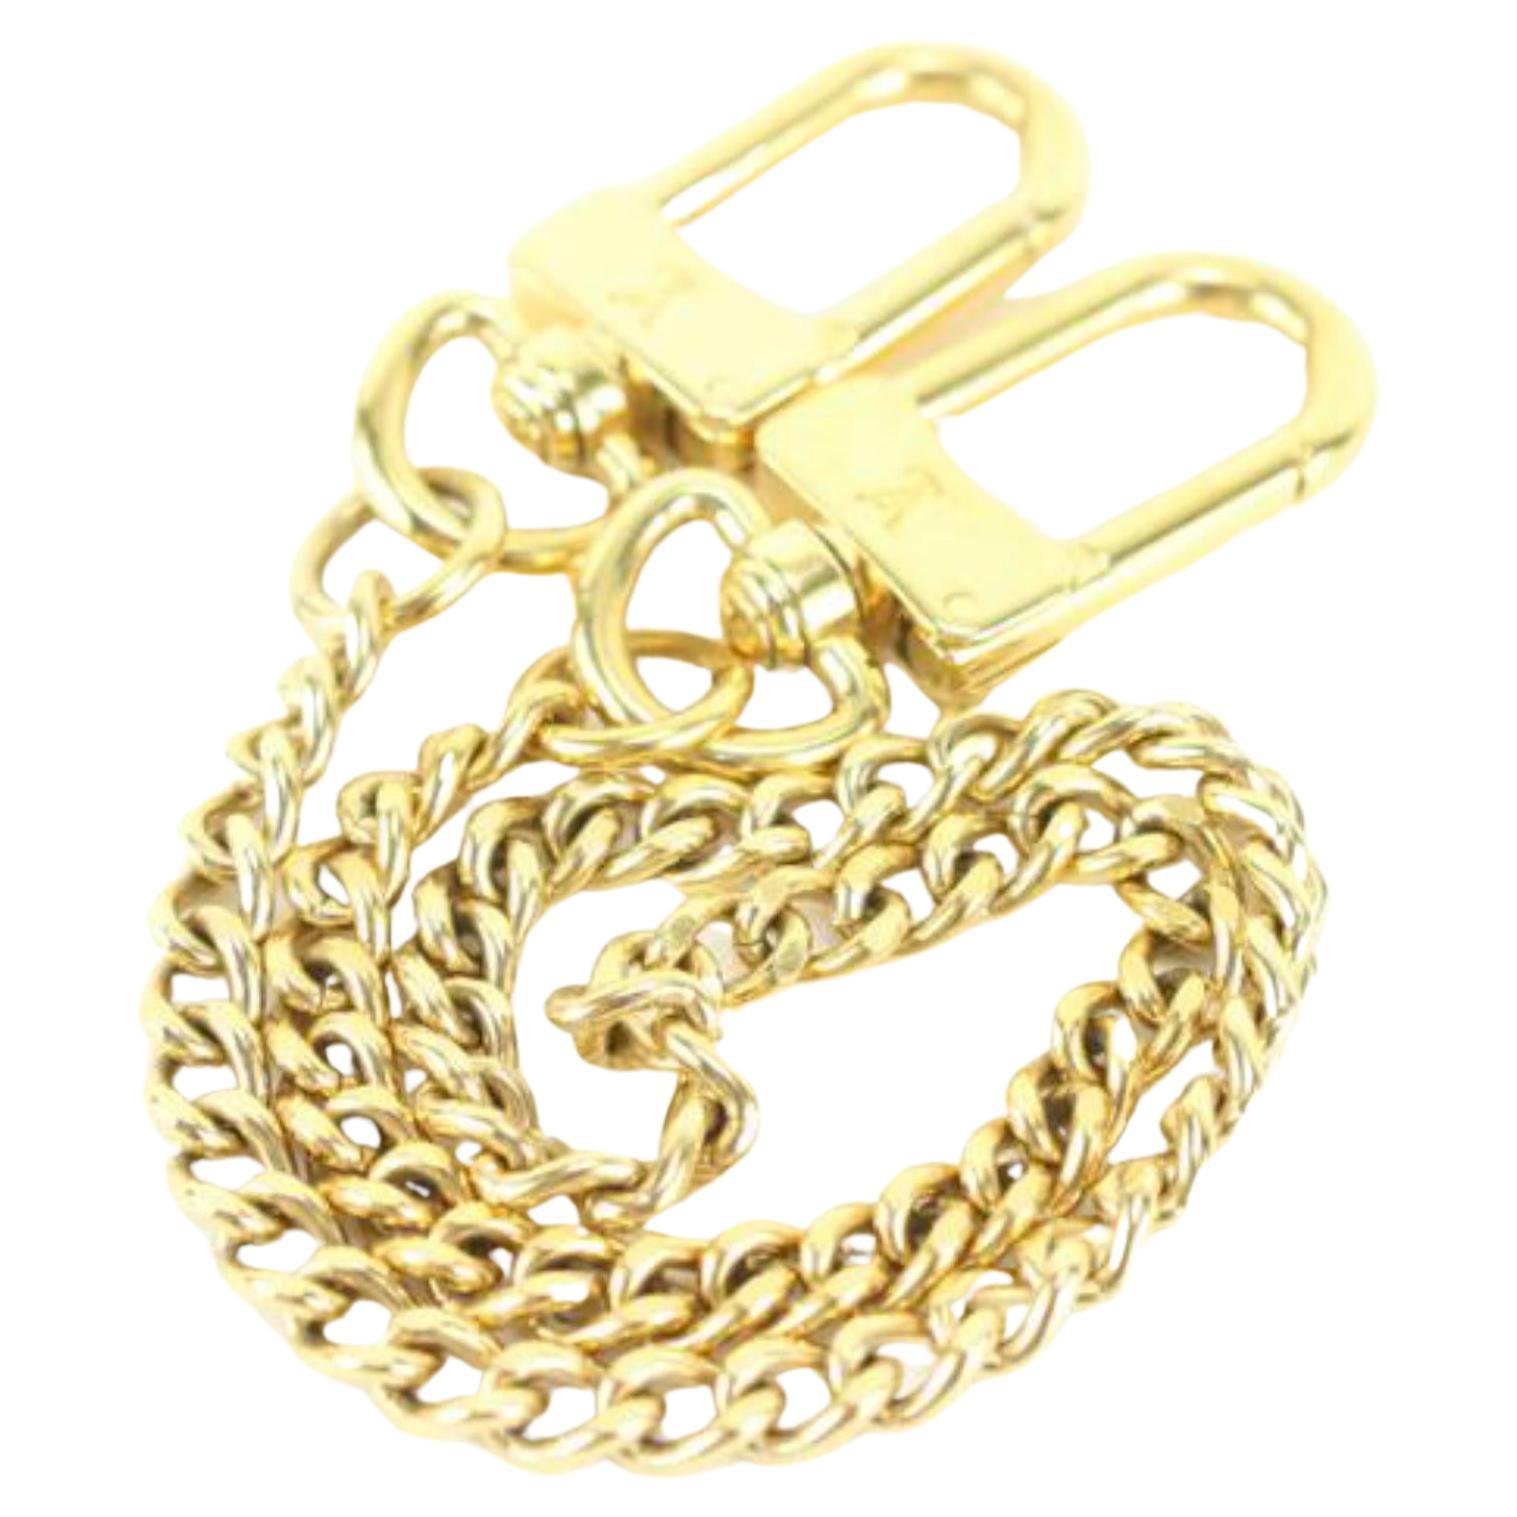 Chain Strap Extender Accessory for Louis Vuitton & More